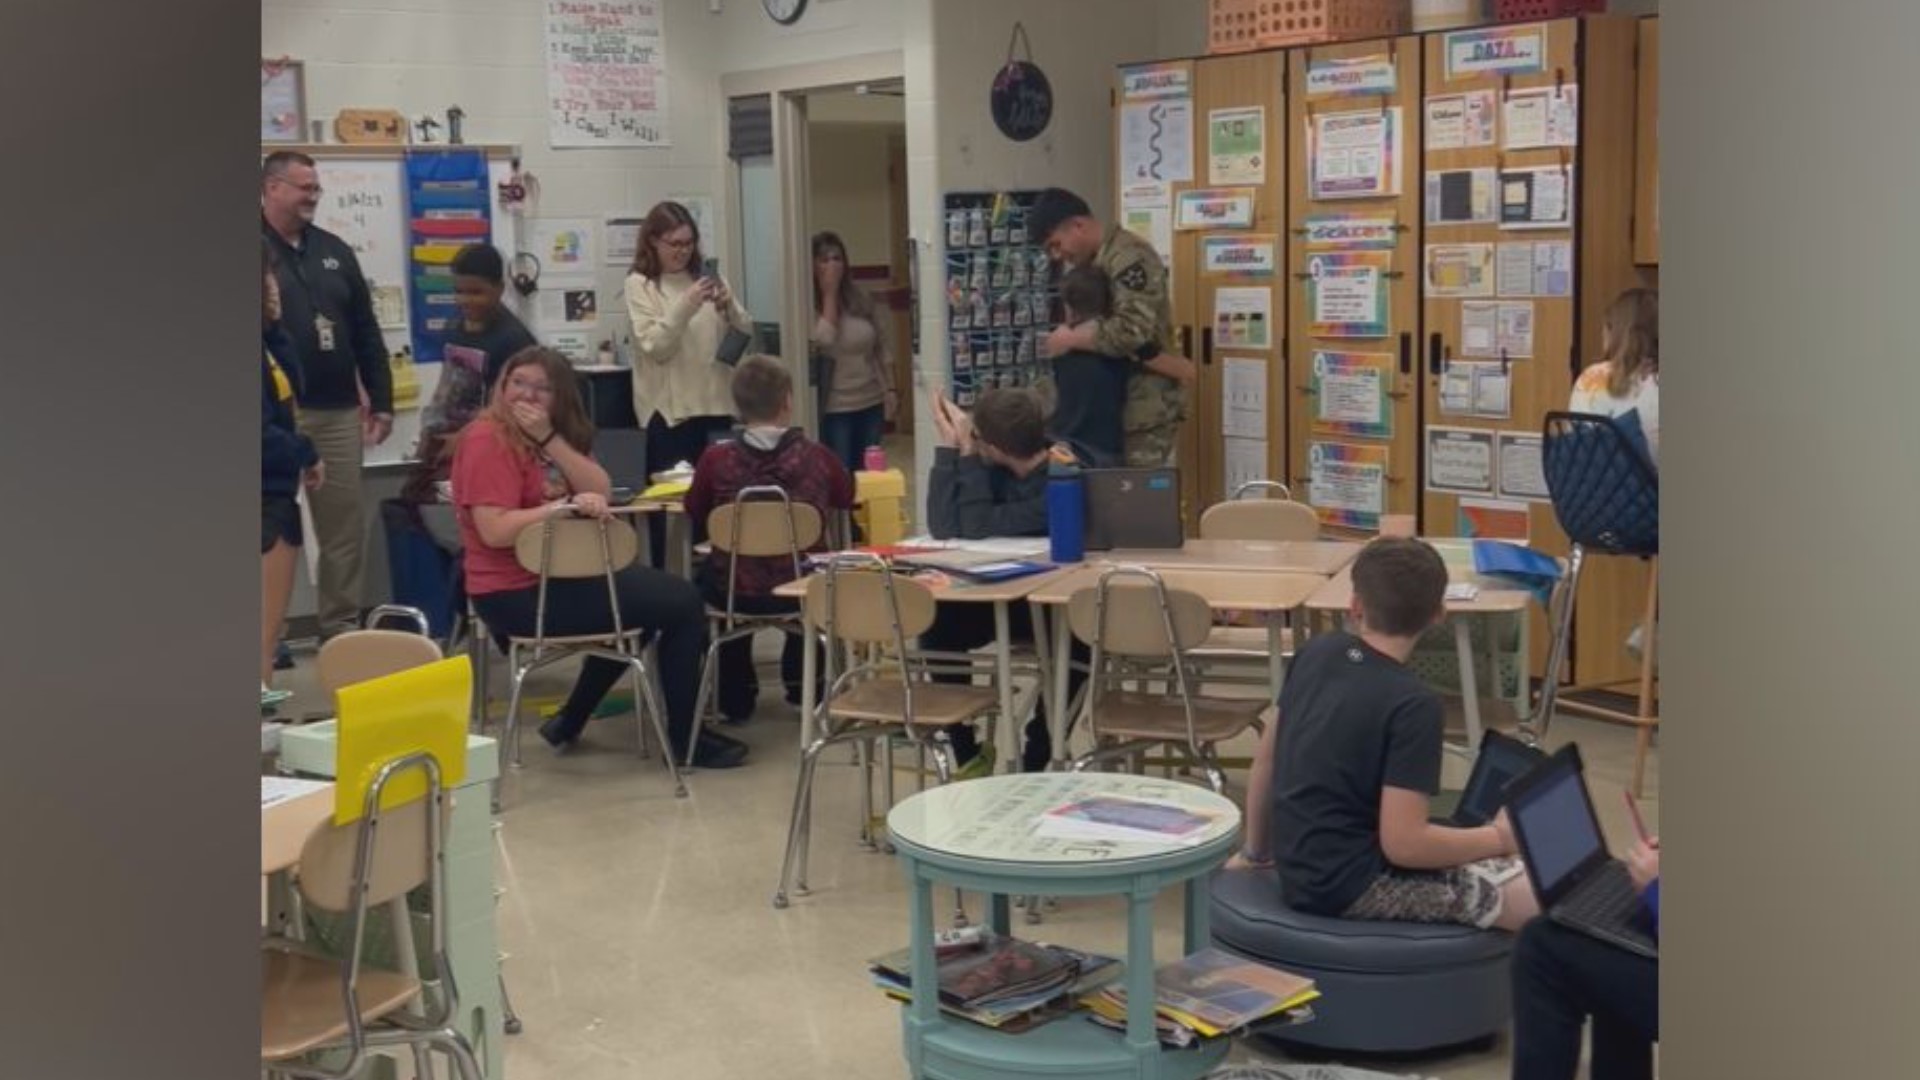 A sixth grader at Eastern York Middle School got the surprise of a lifetime when his older brother, who had been deployed for over a year, walked into his classroom.